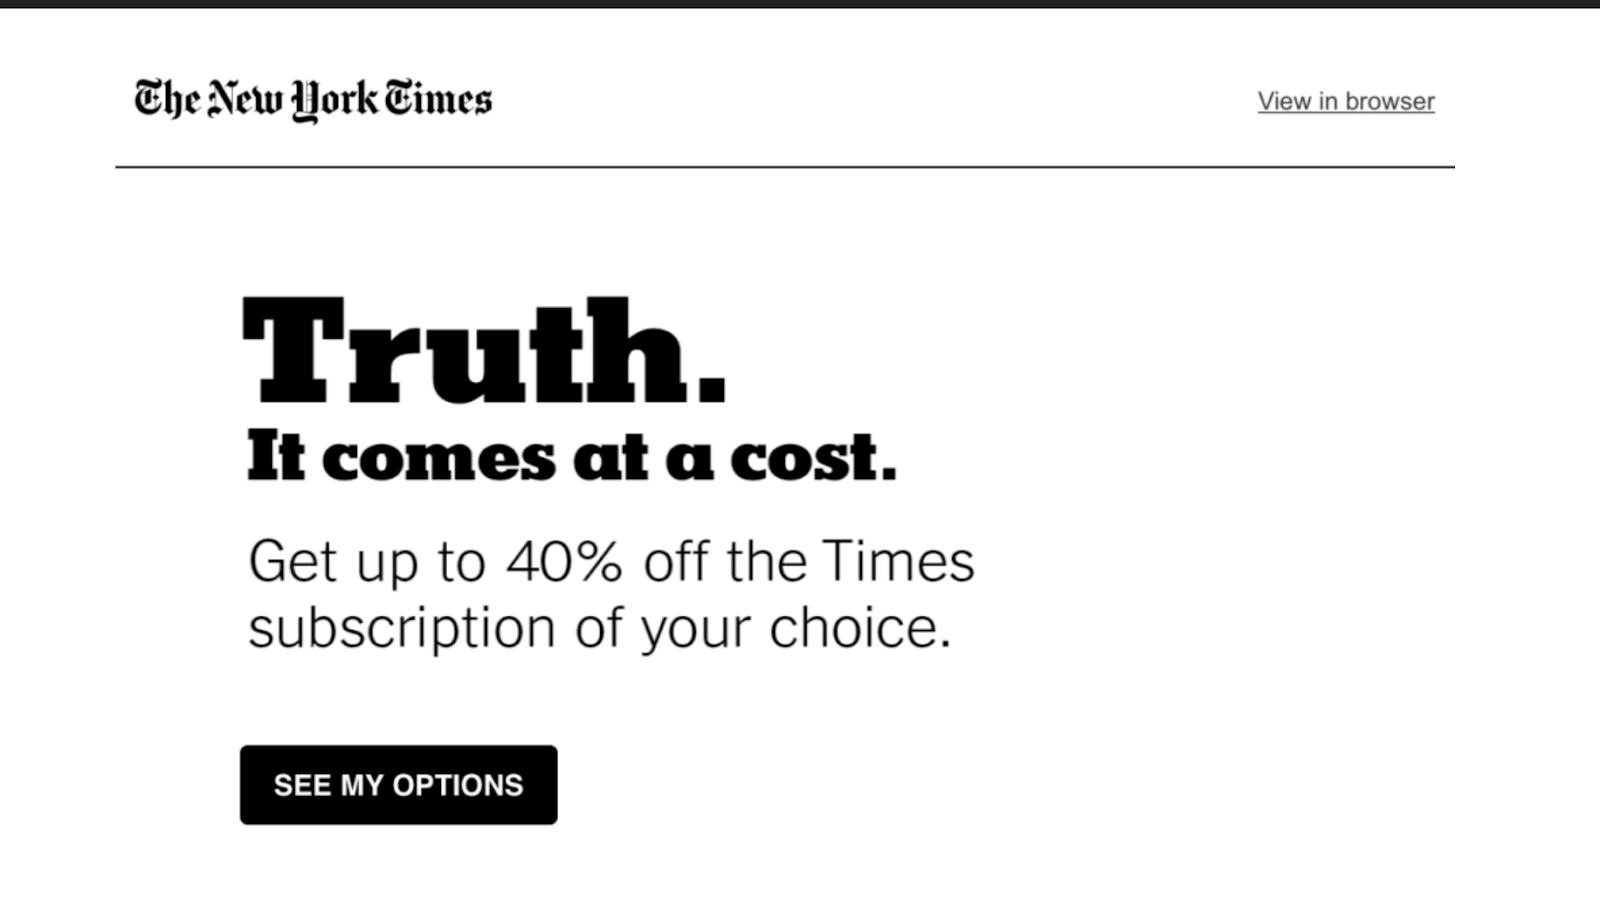 Google Ad example from The New York Times